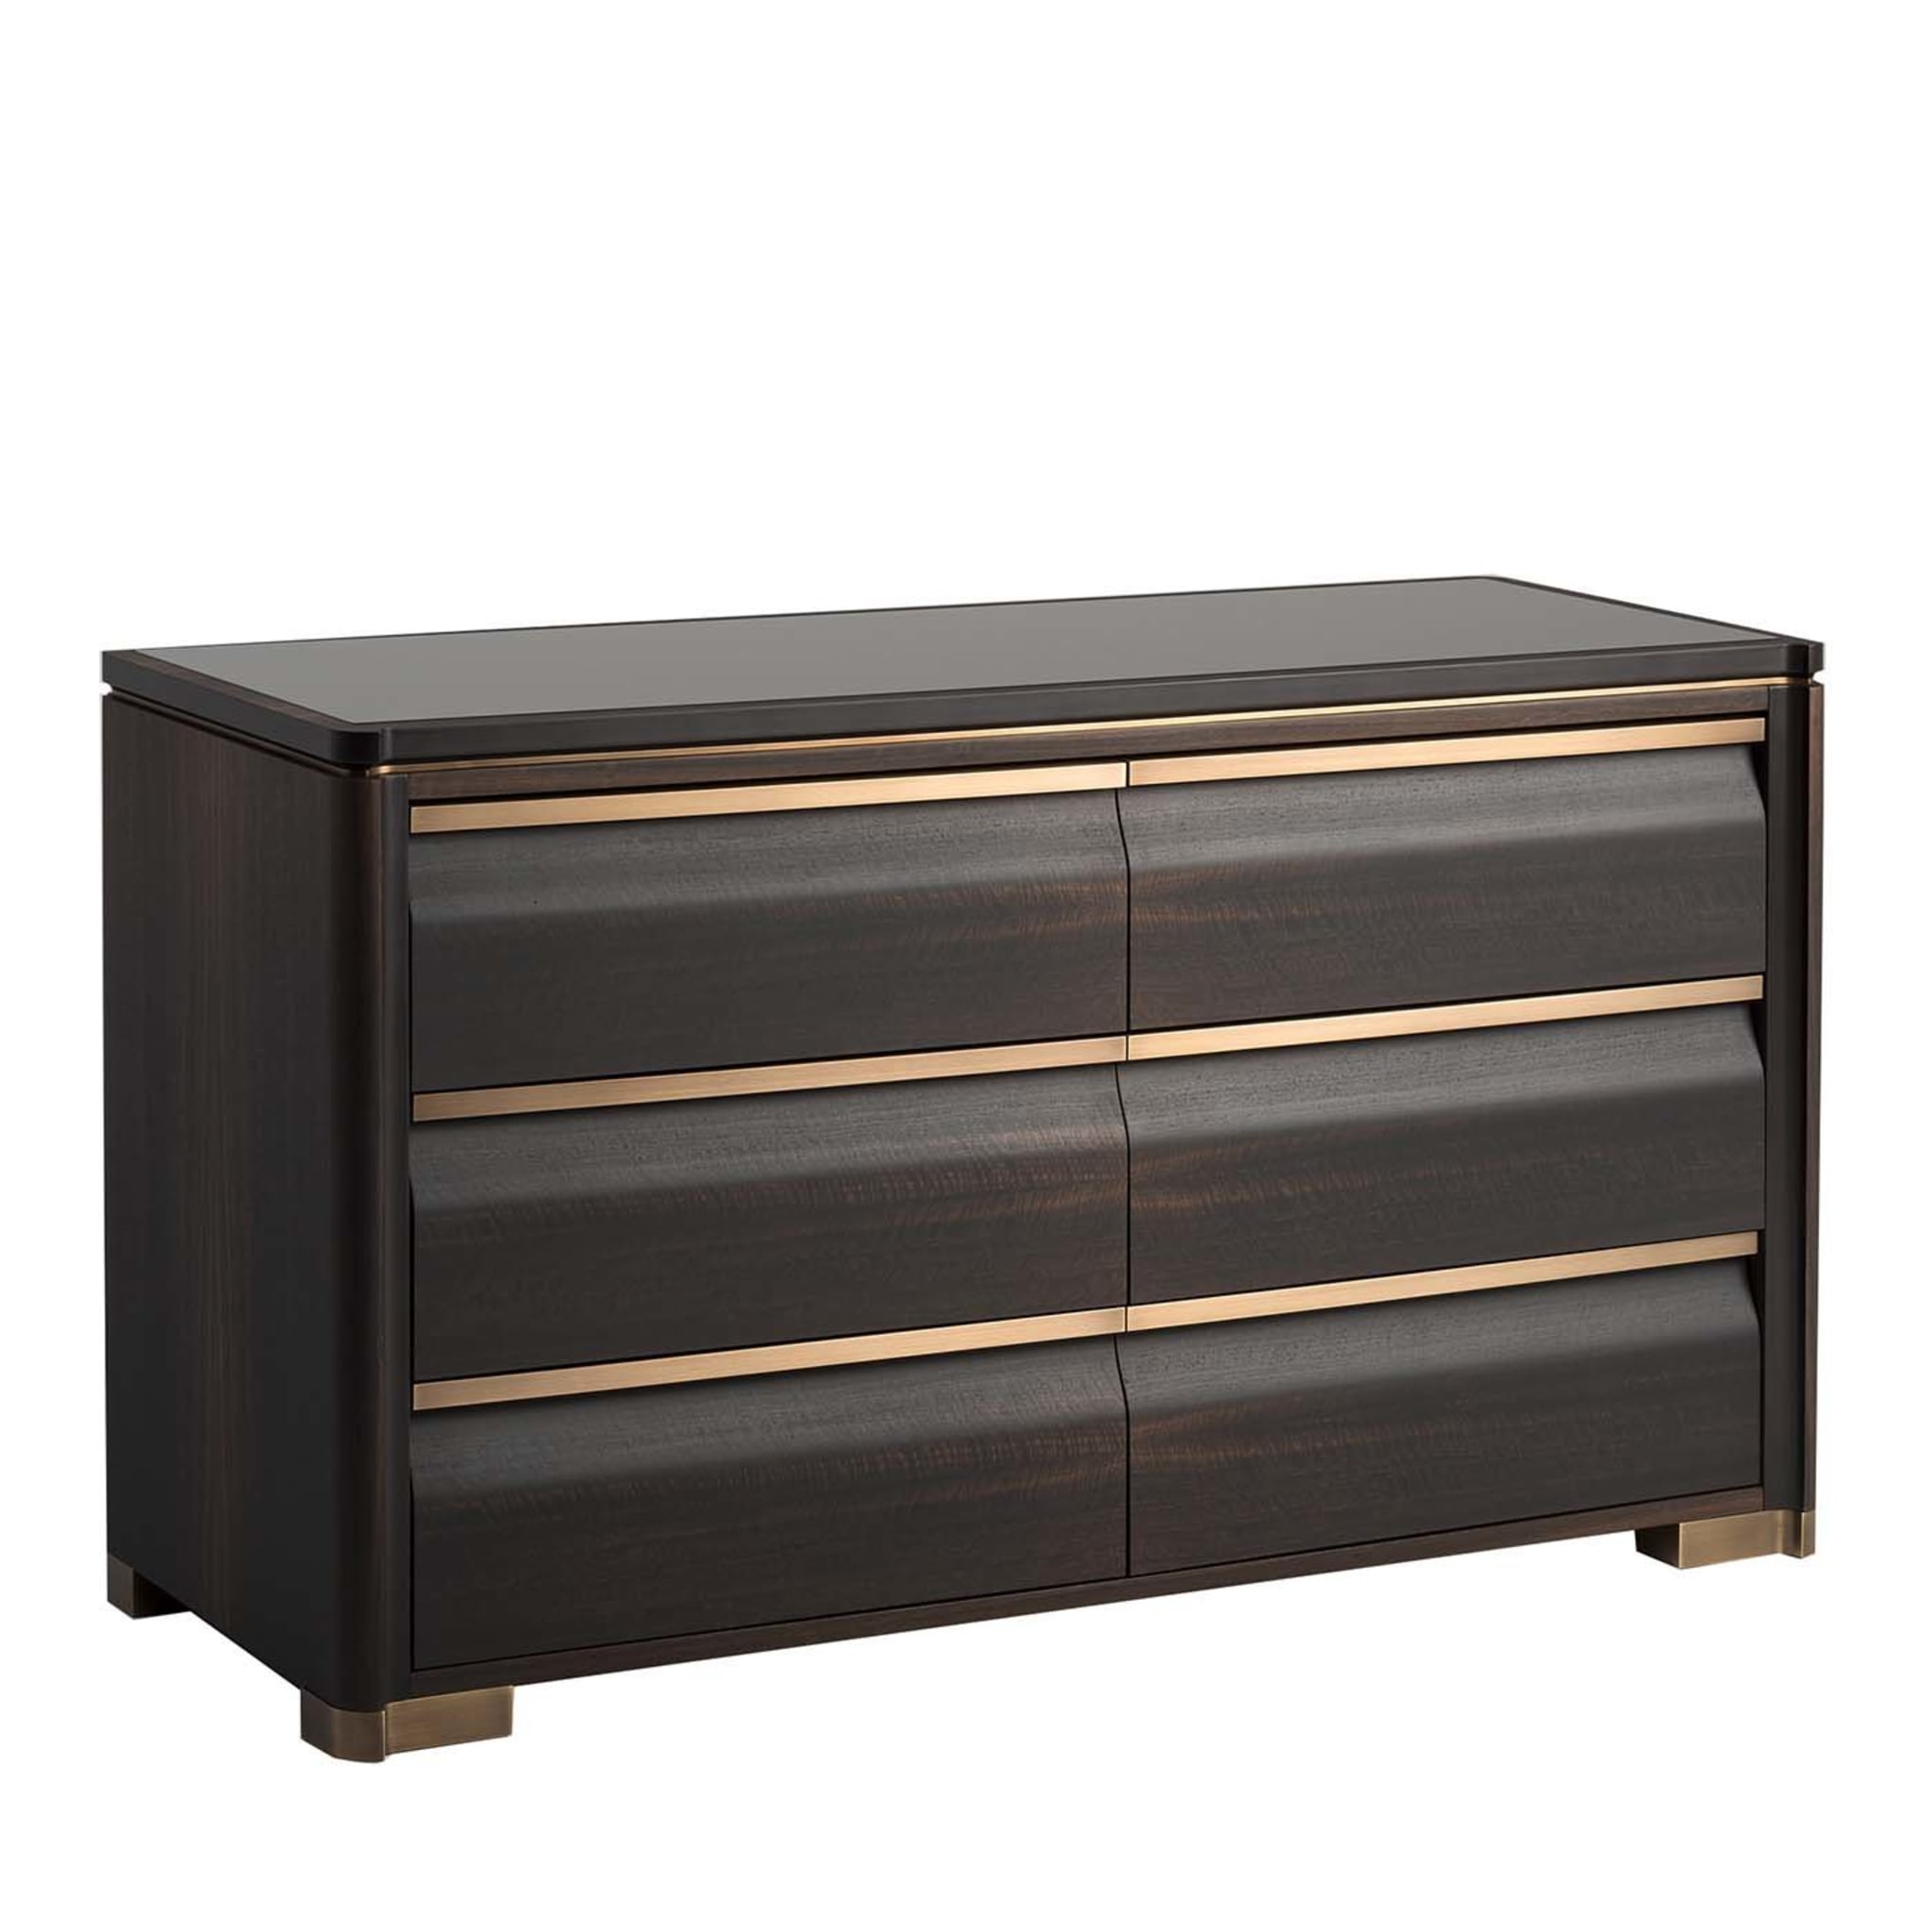 Ercole chest of drawers by Marco and Giulio Mantellassi - Main view